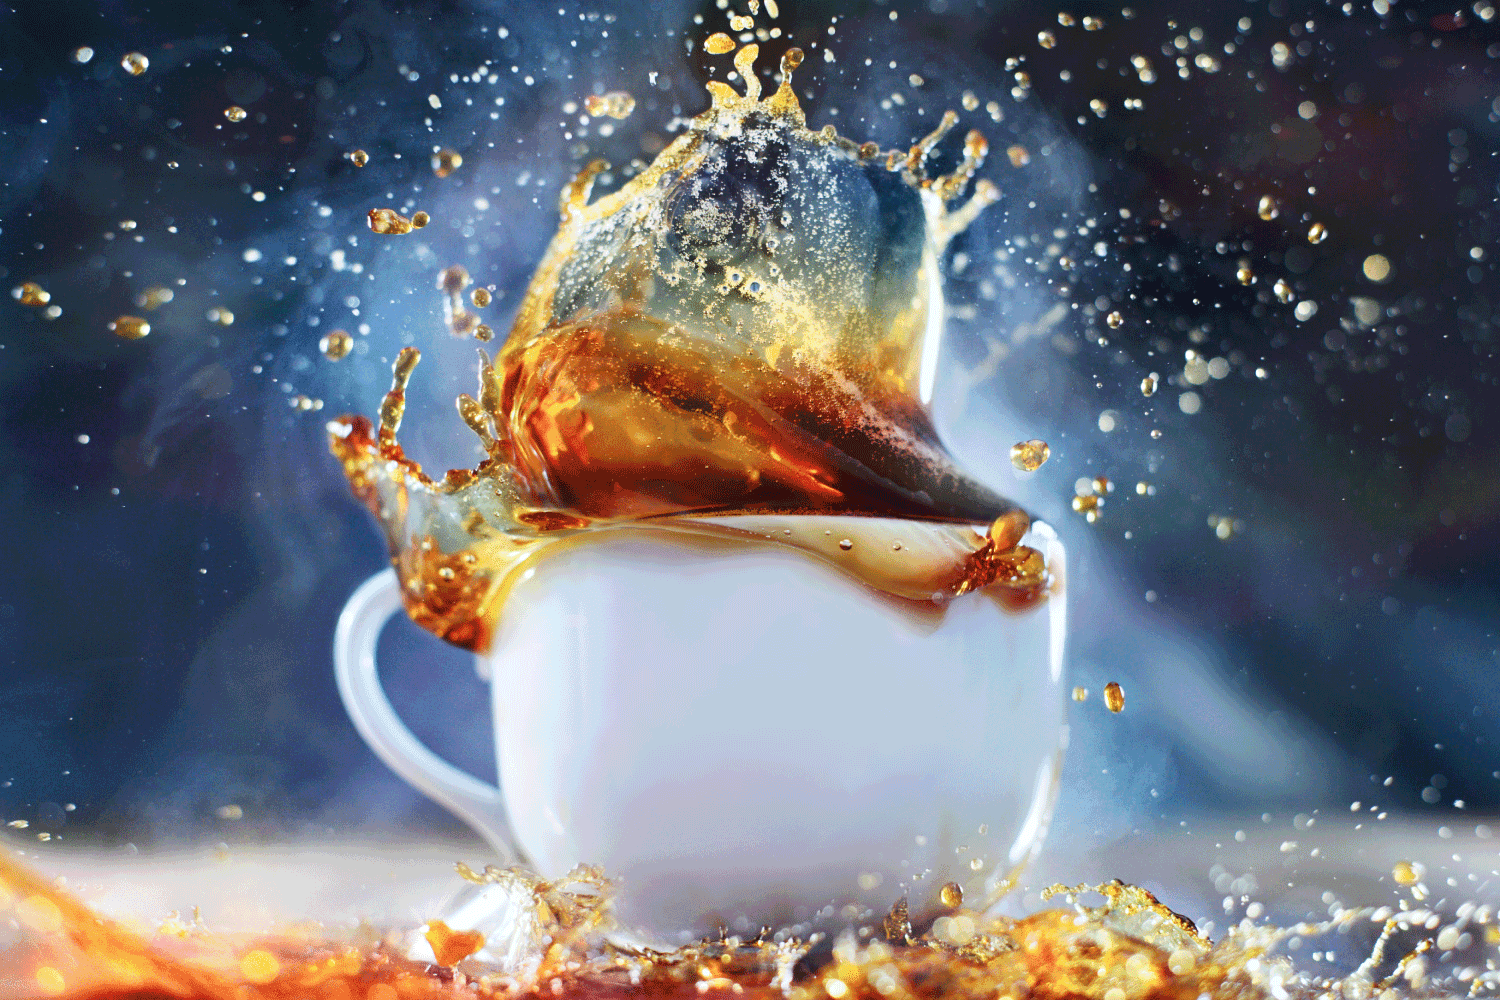 Great splash in the cup of coffee on a blue background.